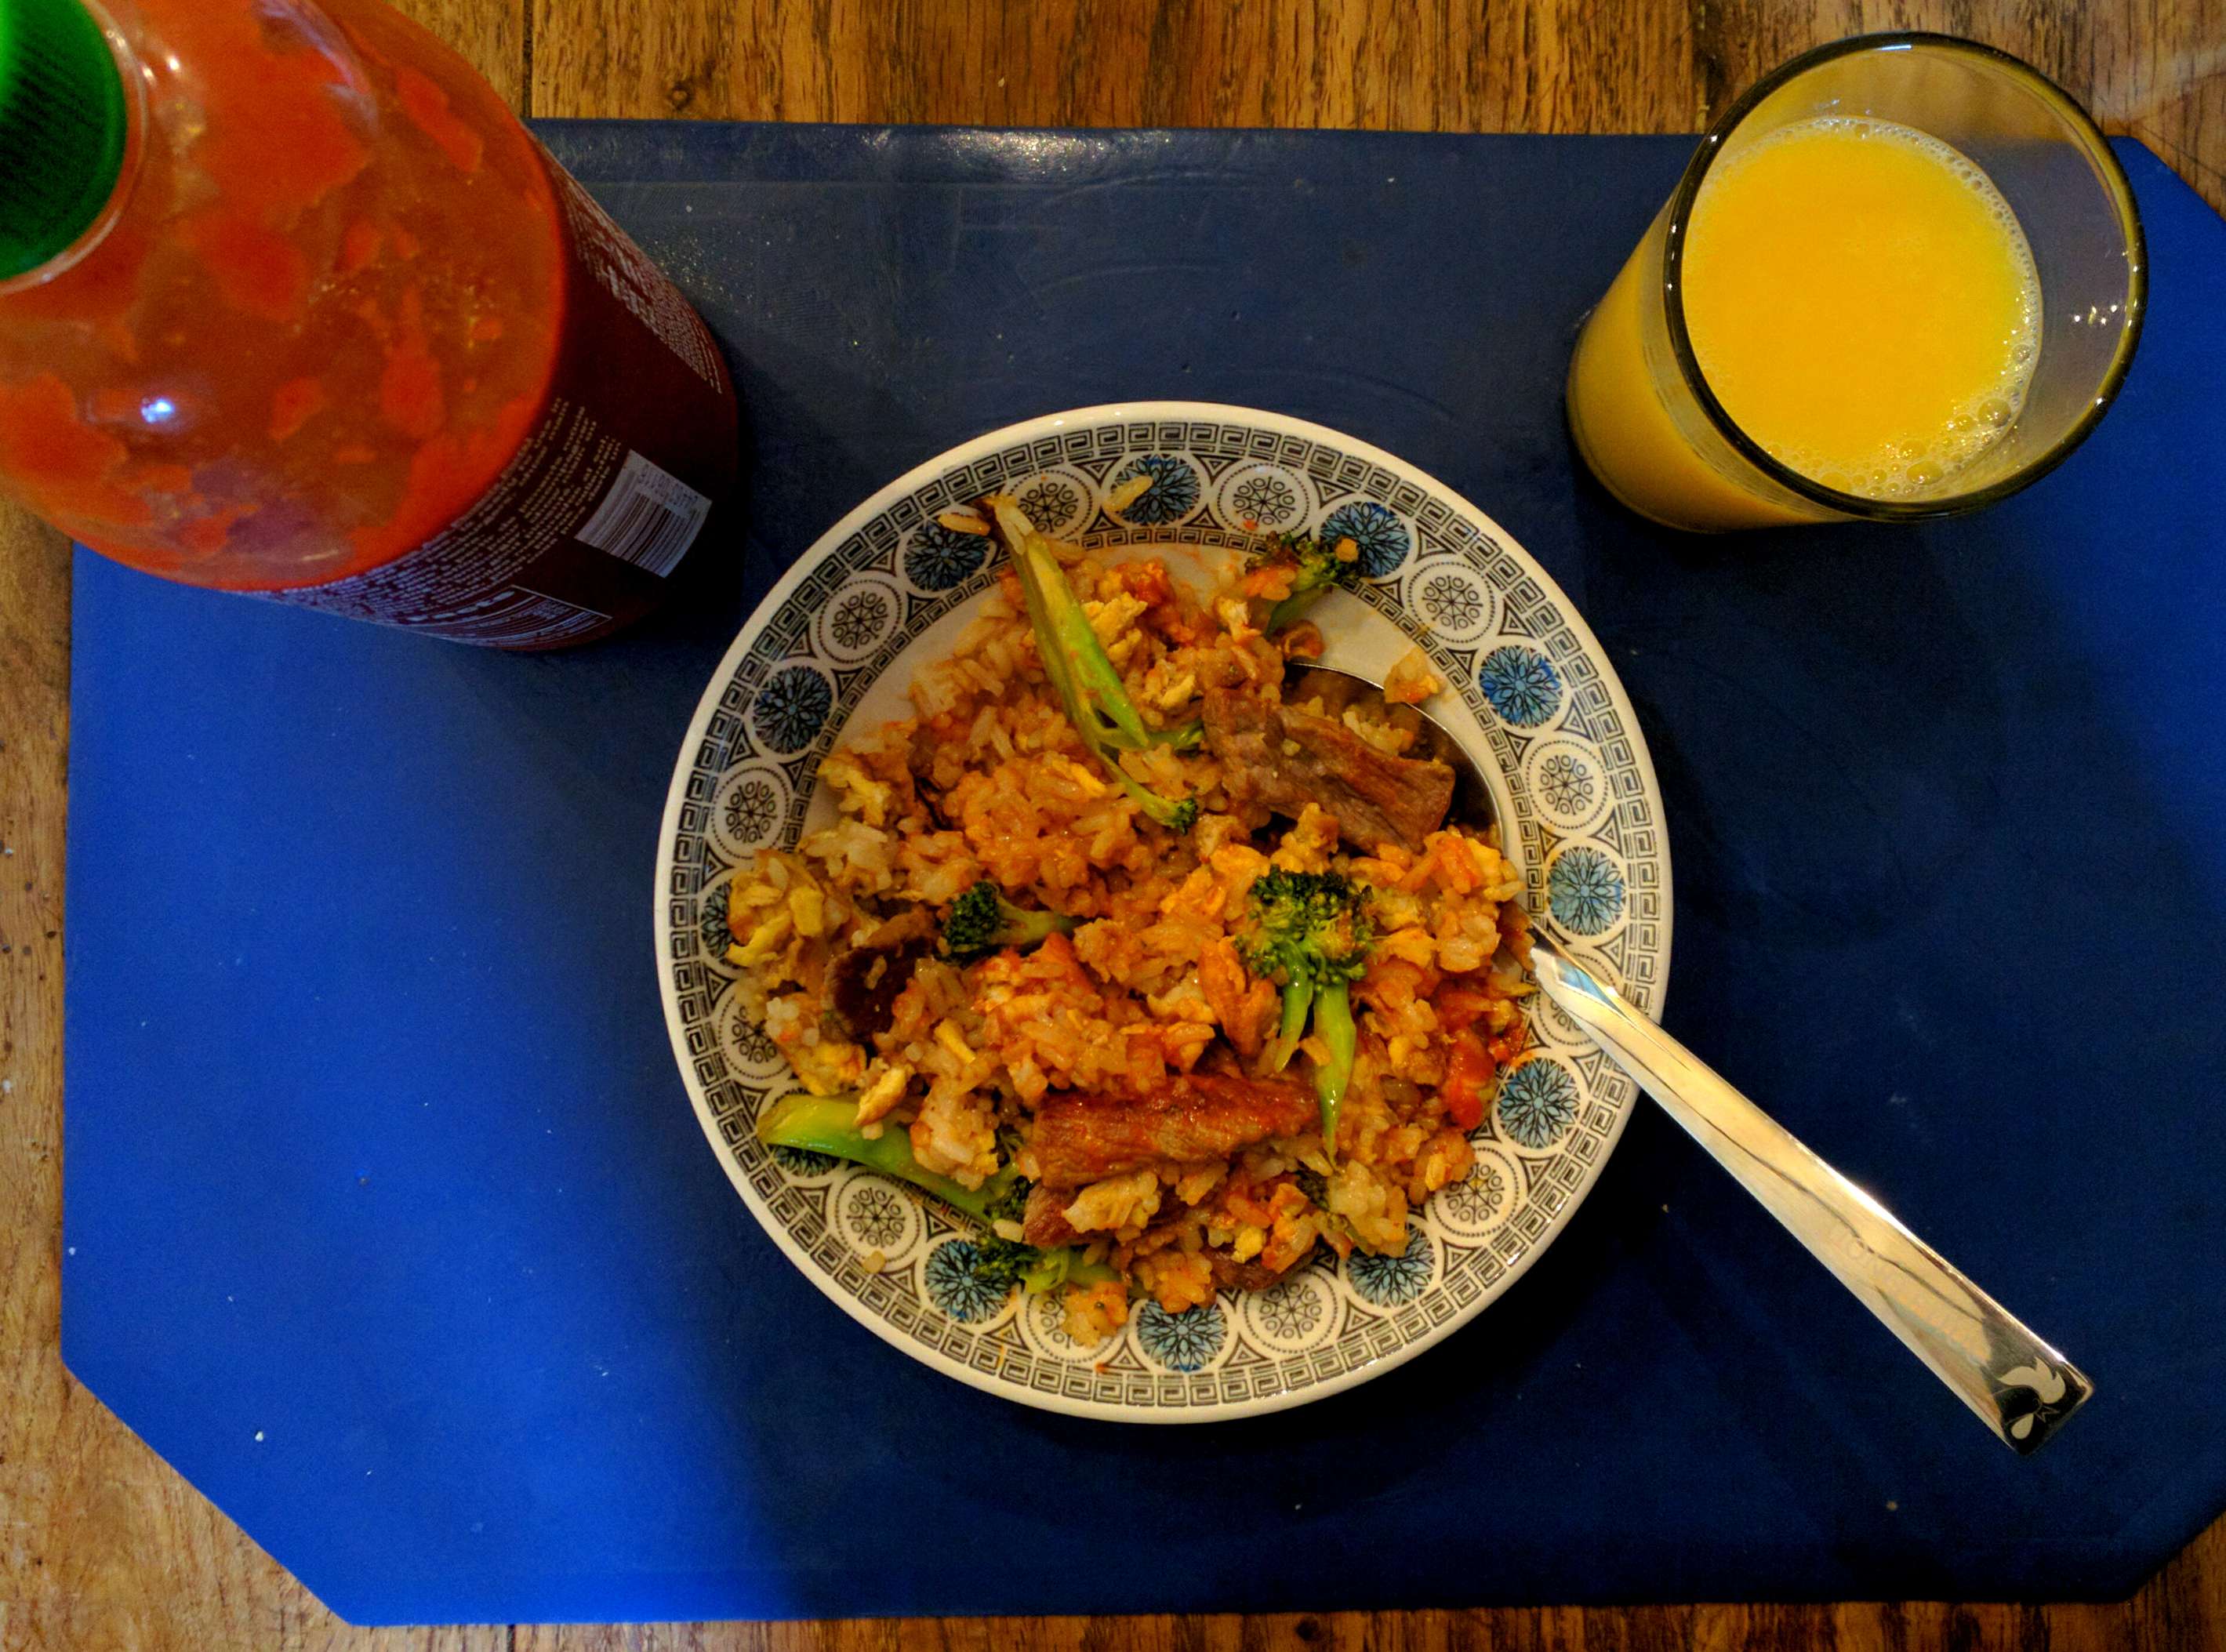 Fried rice with beef and broccoli